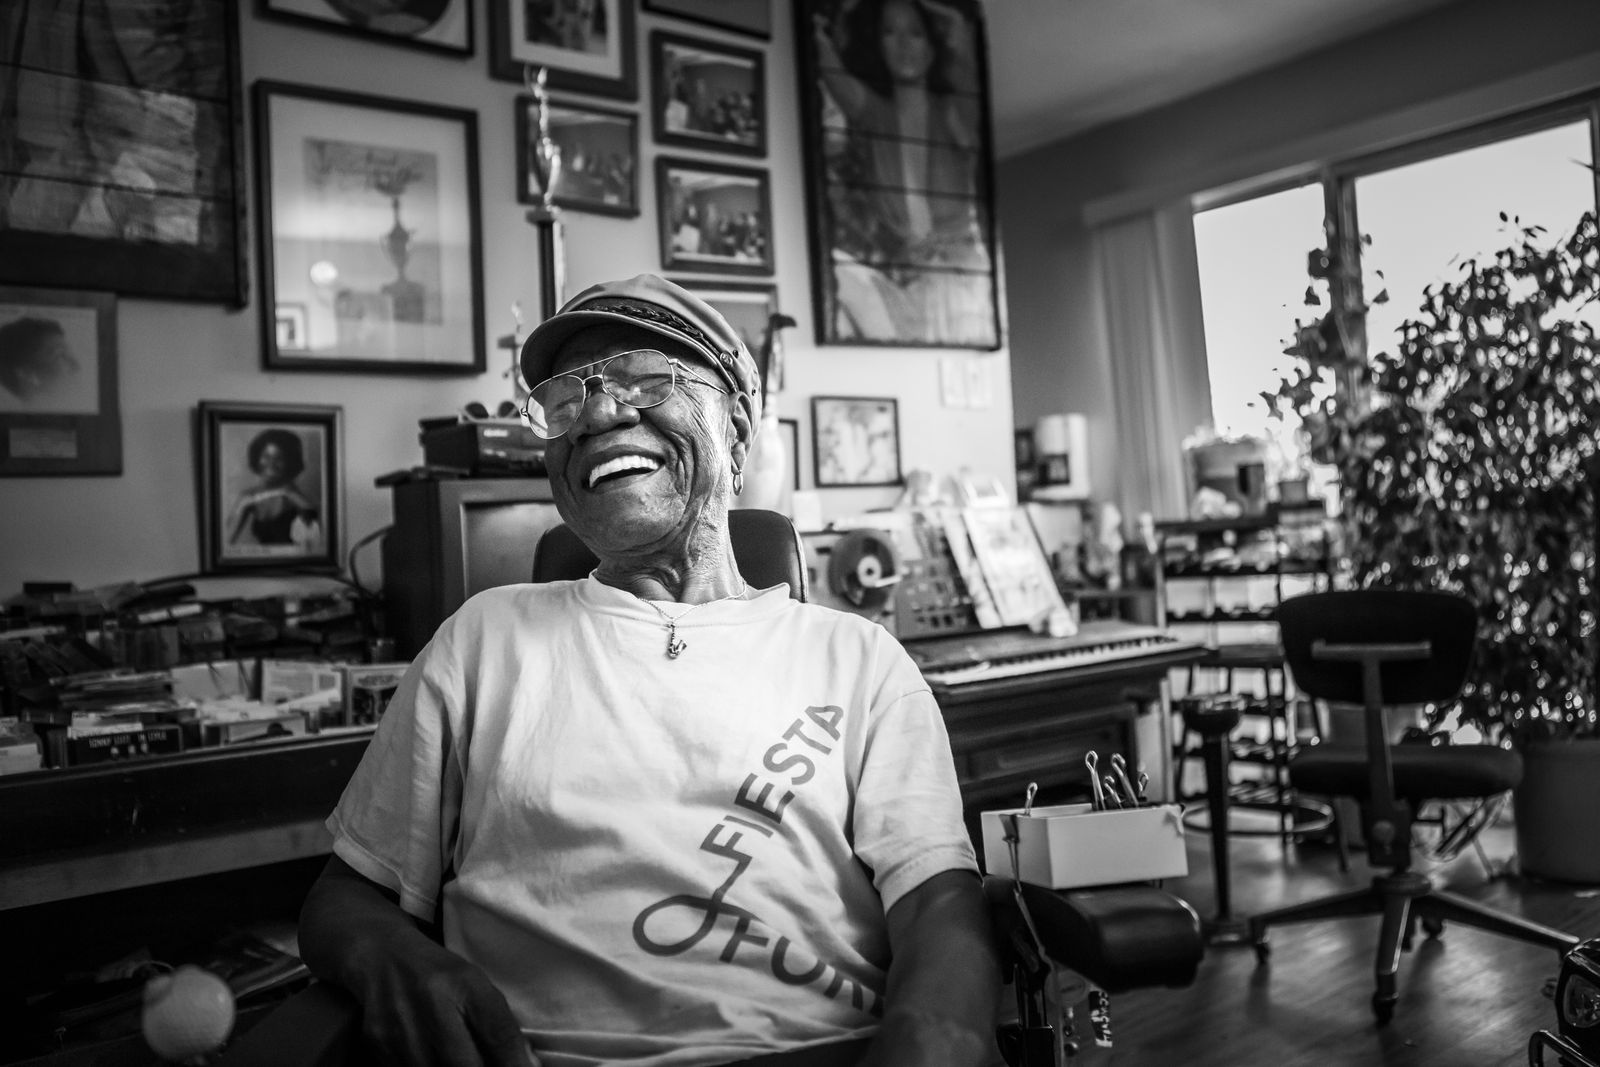 © JANICE MILHEM - Lee Canady, 84 years old. Former businessman and owner of Lee's Monroe Music downtown Detroit.